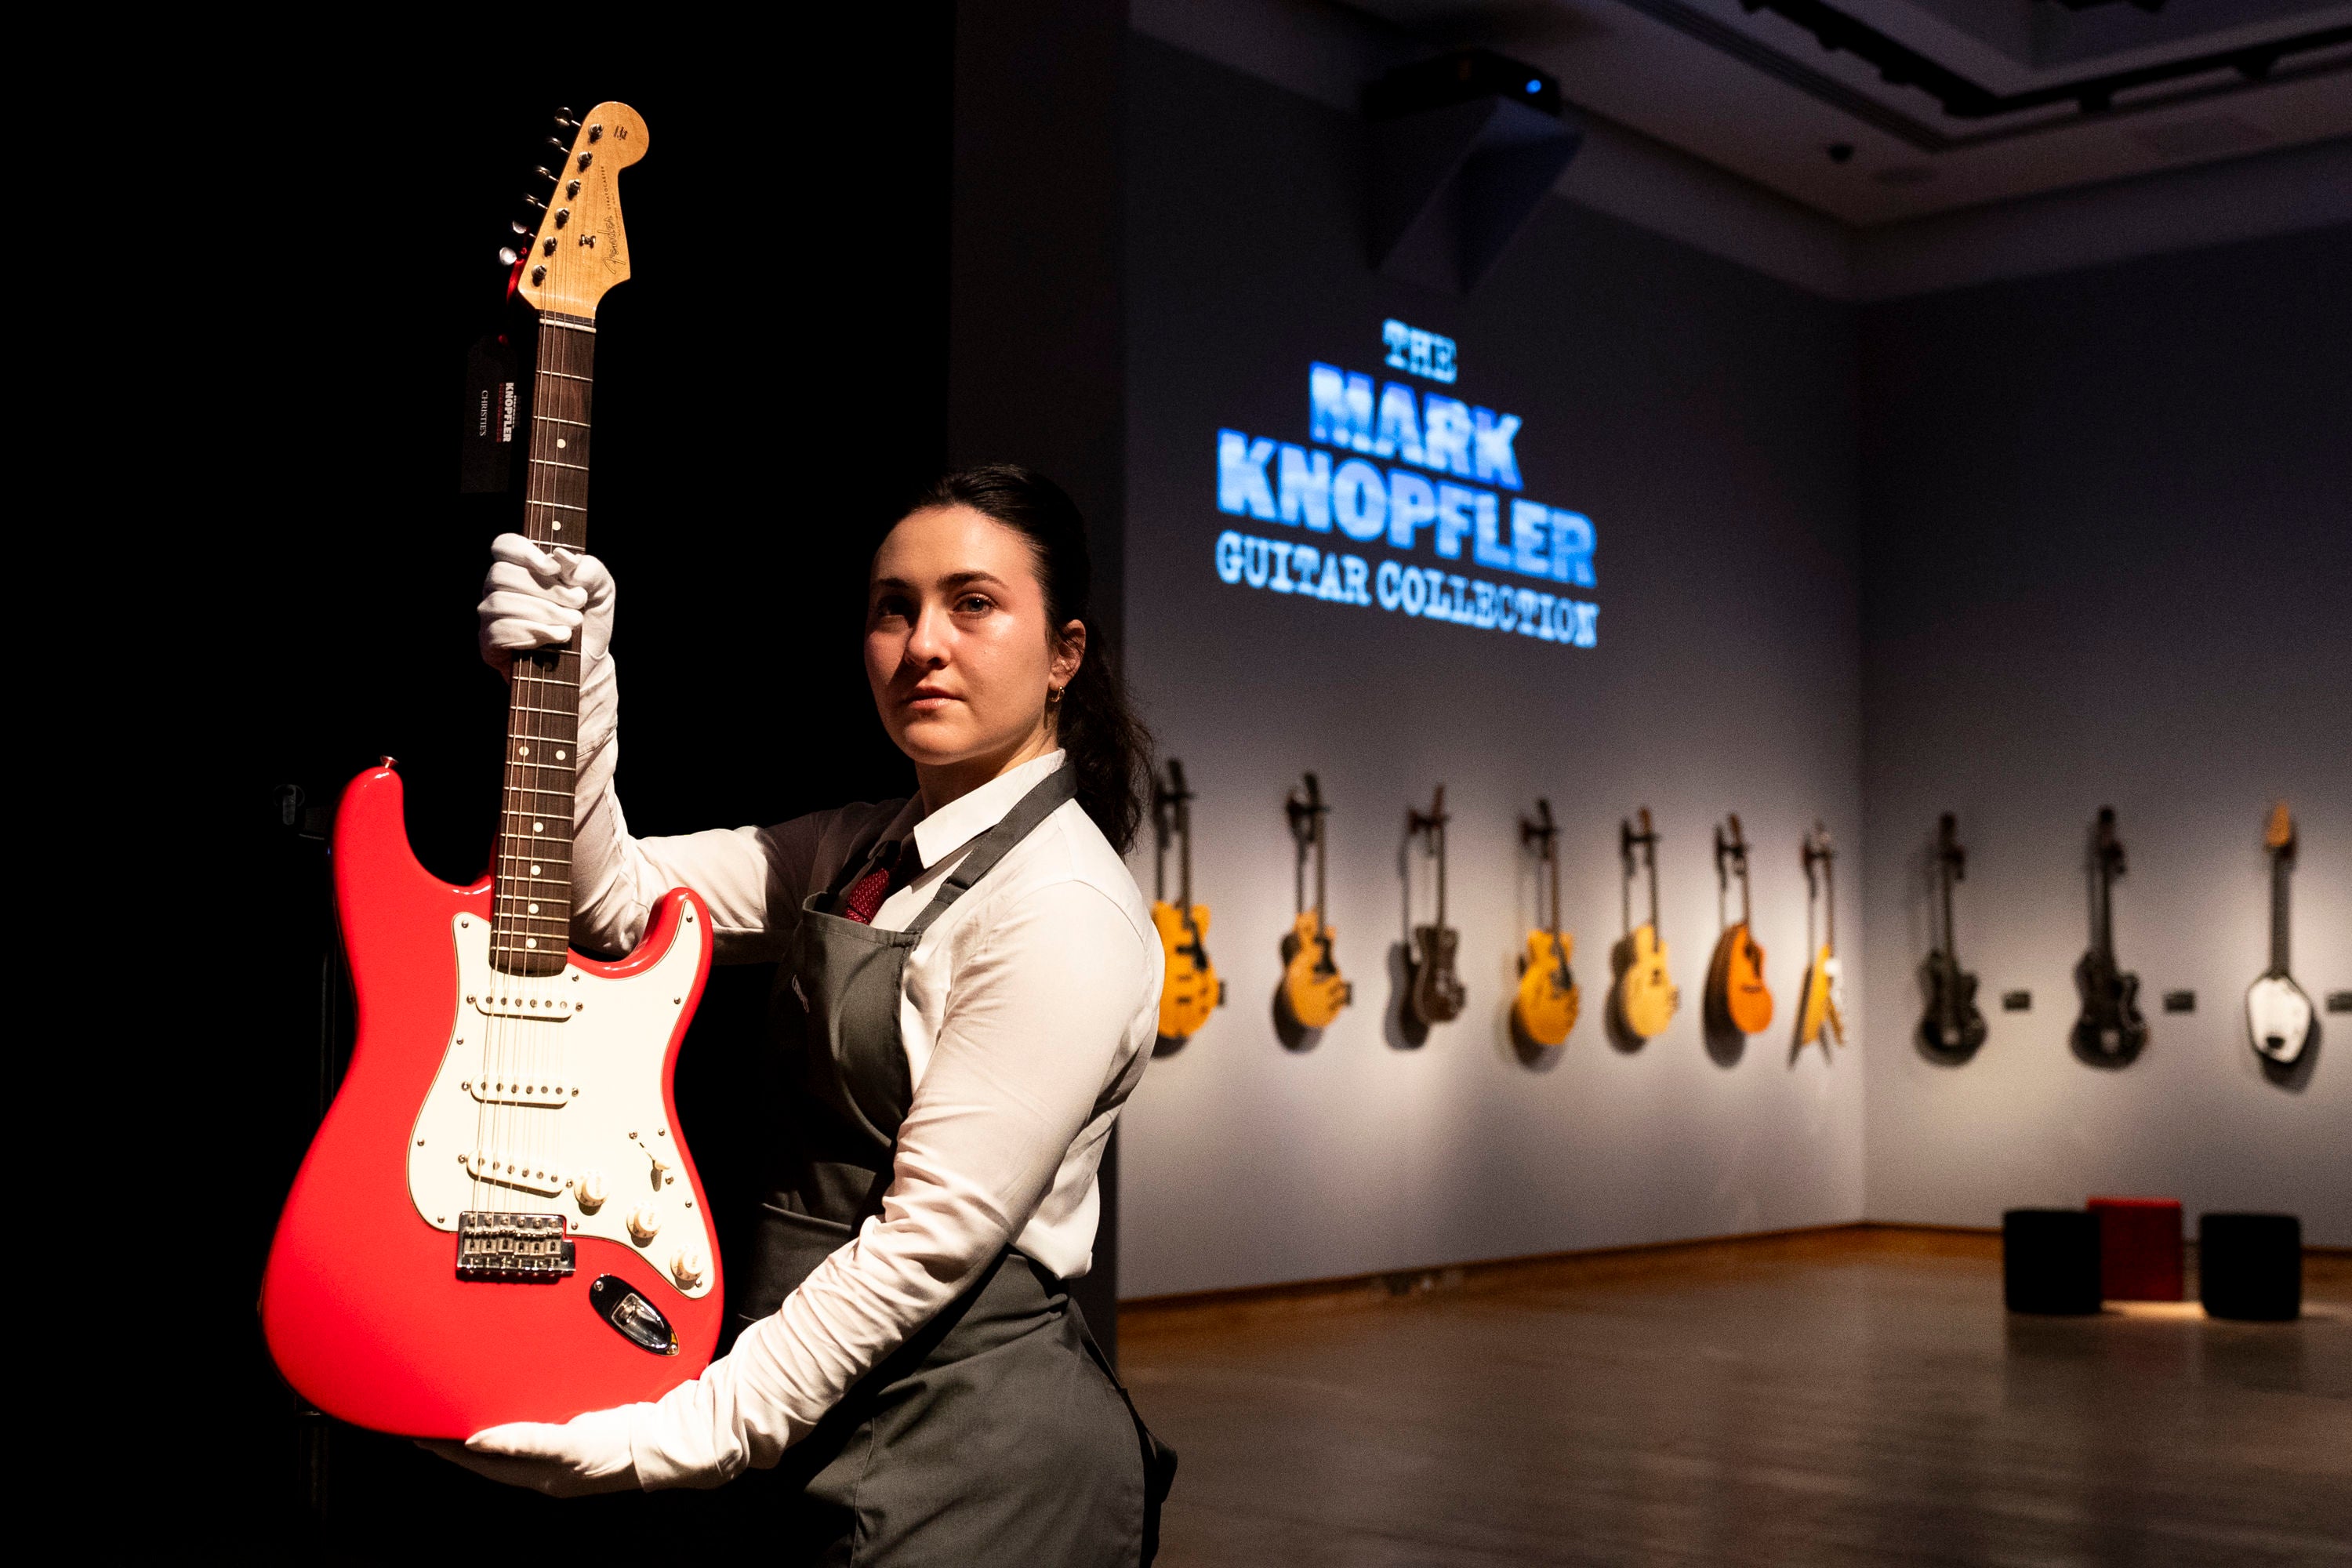 A Christie's art handler holds up Mark Knopfler's Red Schecter Telecaster guitar, among more than 120 guitars to be sold at auction last month